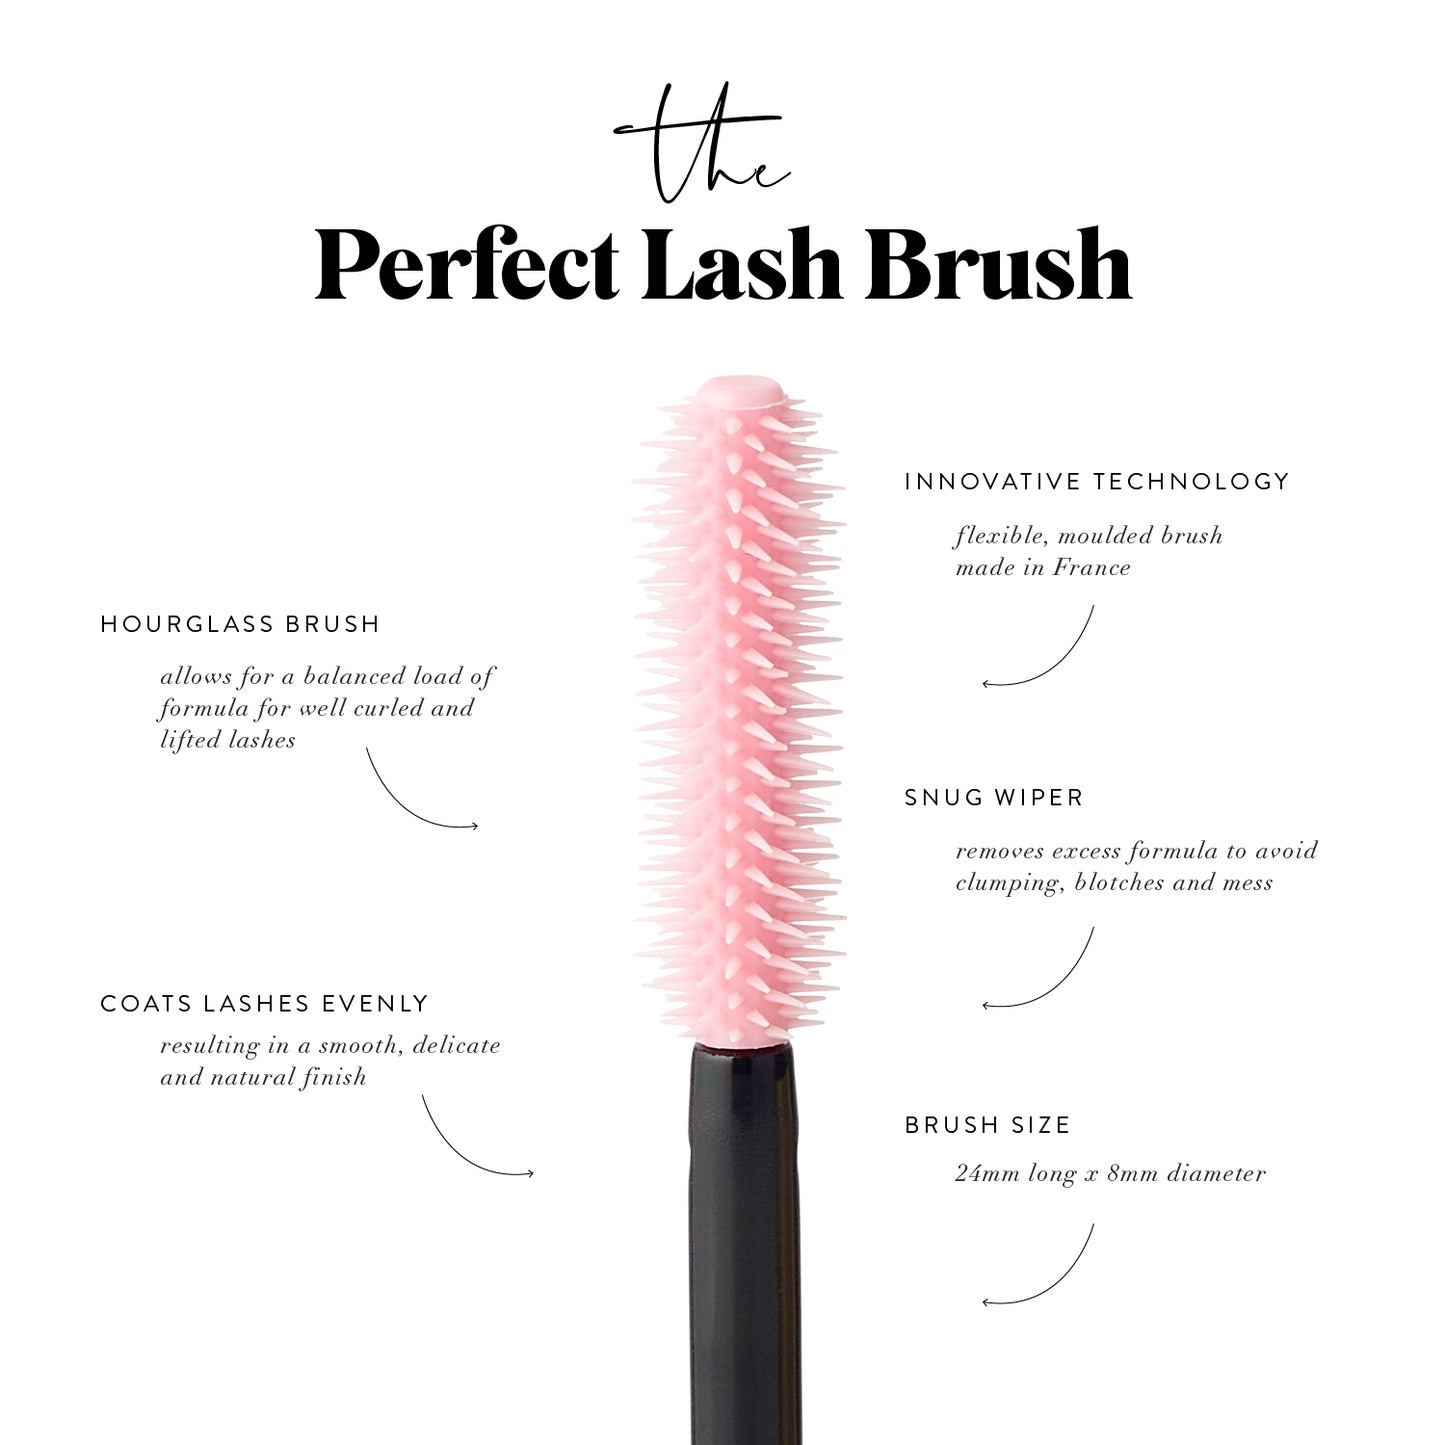 The Perfect (effortless!) Lash Brush.Featuring an innovative, high-tech rubber (hytrel) brush for effortless application, precision and control without clumping. Lashes look longer and super smooth. 